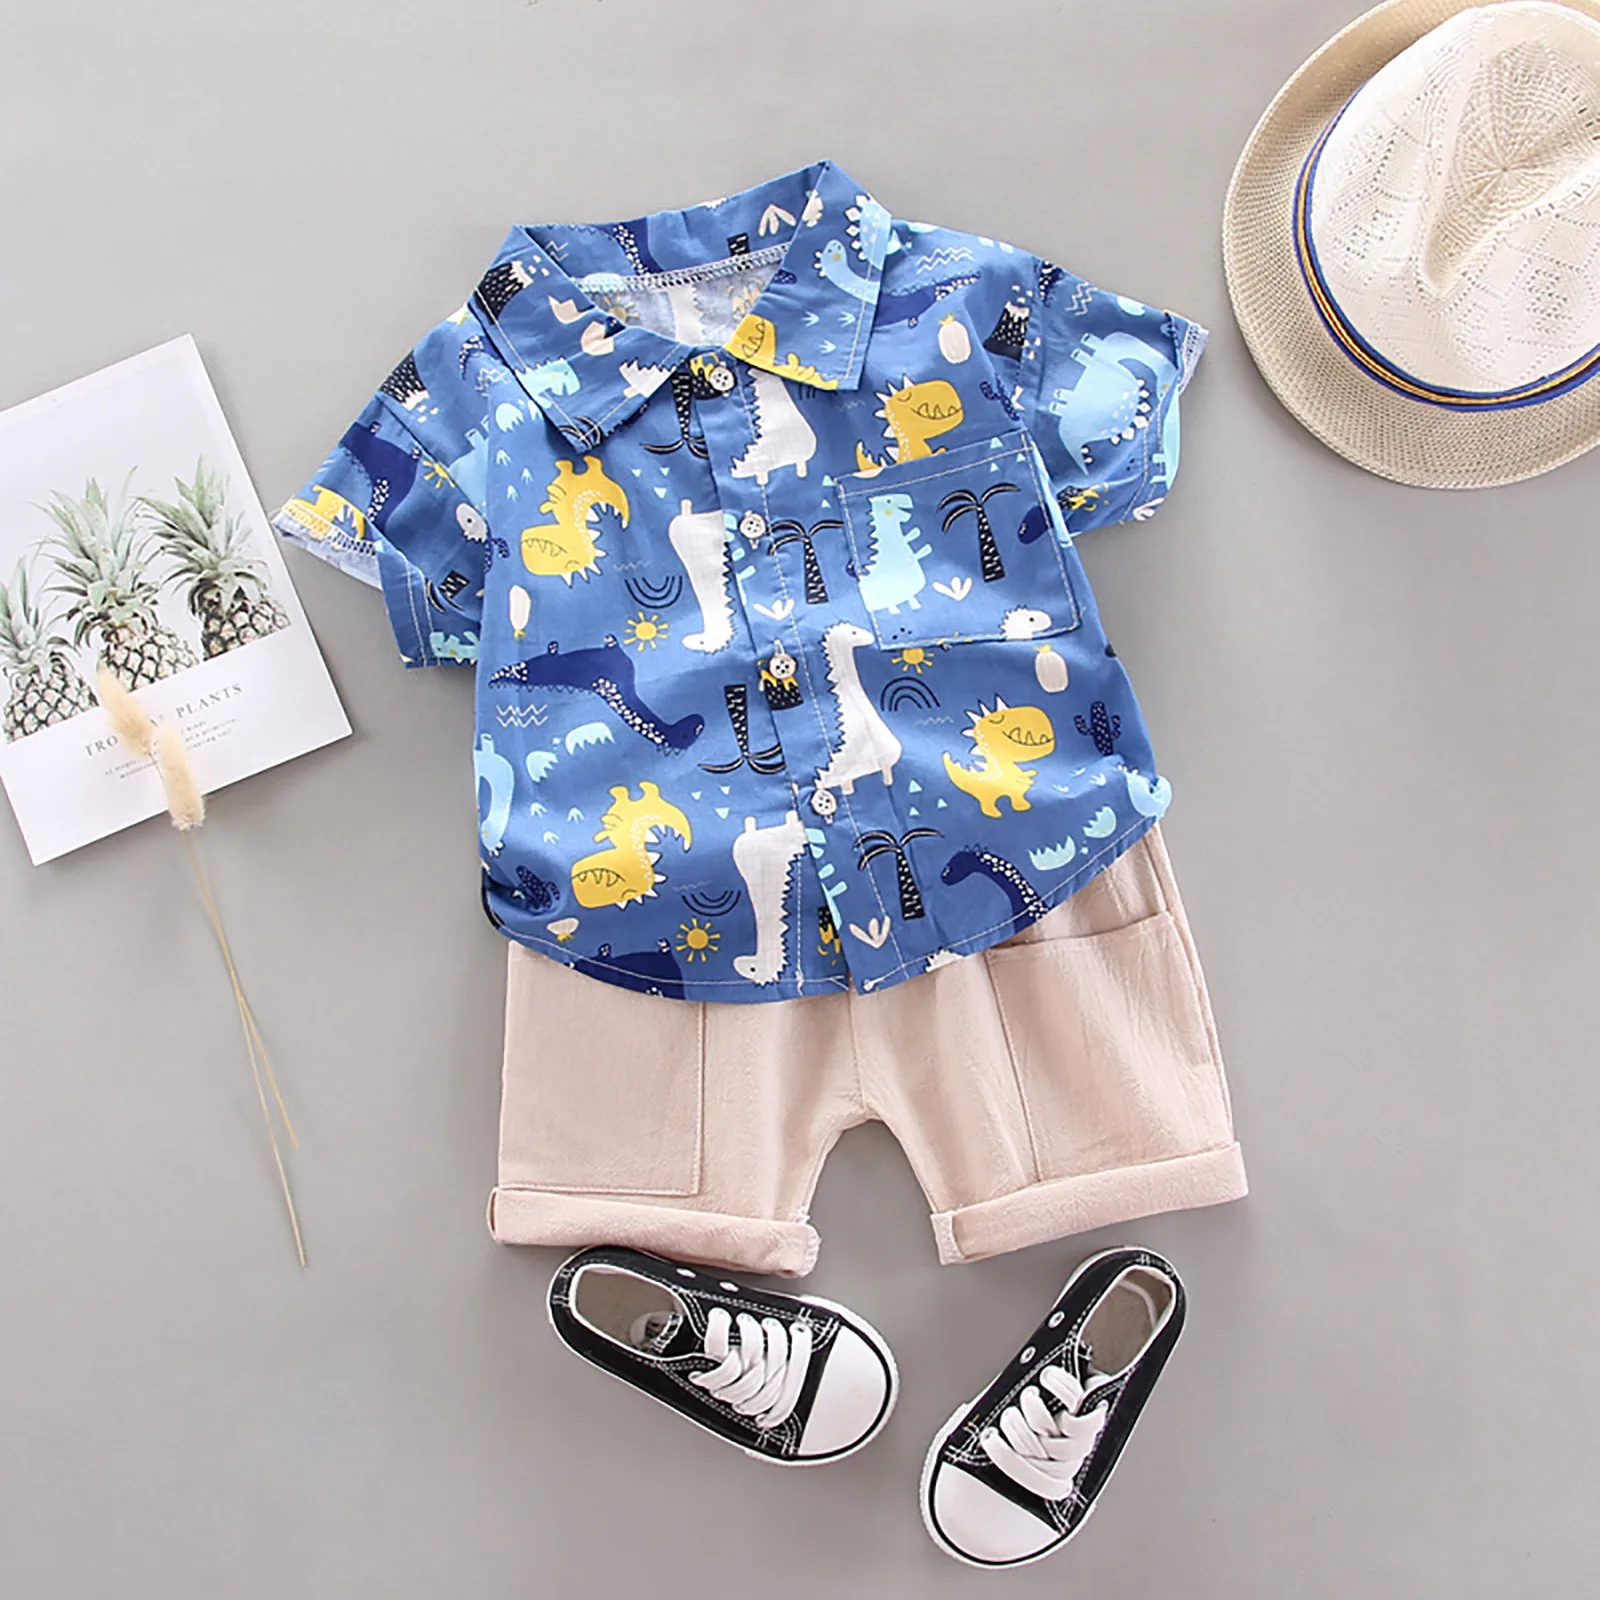 1-4 Years Toddler Baby Boys Clothing Sets Cute Cartoon Dinosaur Shirts+Shorts Kids Suits 2 Piece Outfits Sets Kids Boy Clothing